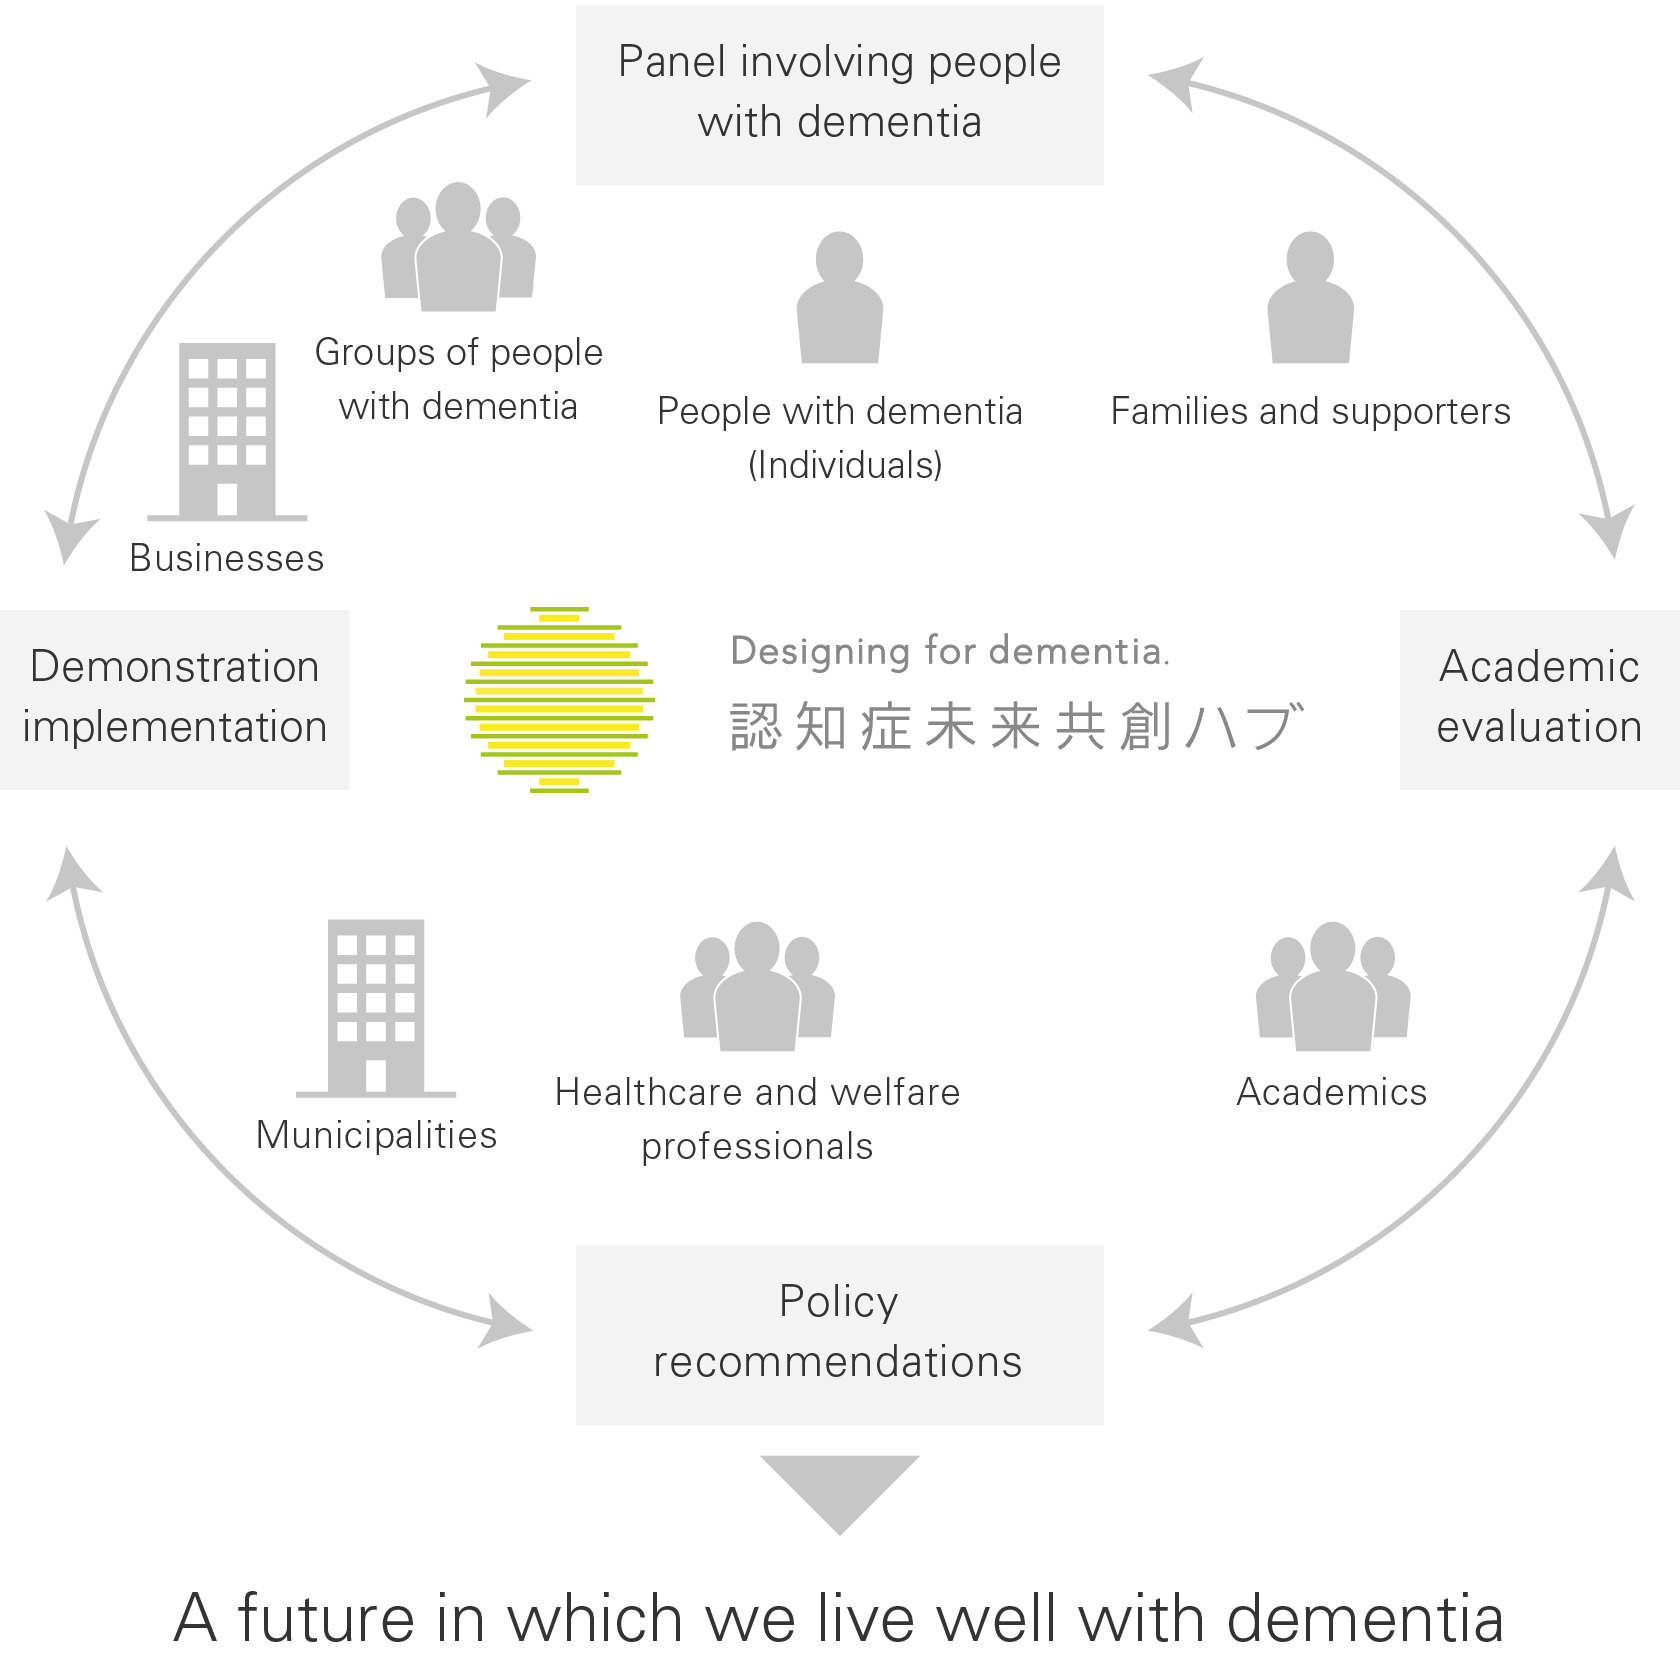 A future in which we live well with dementia